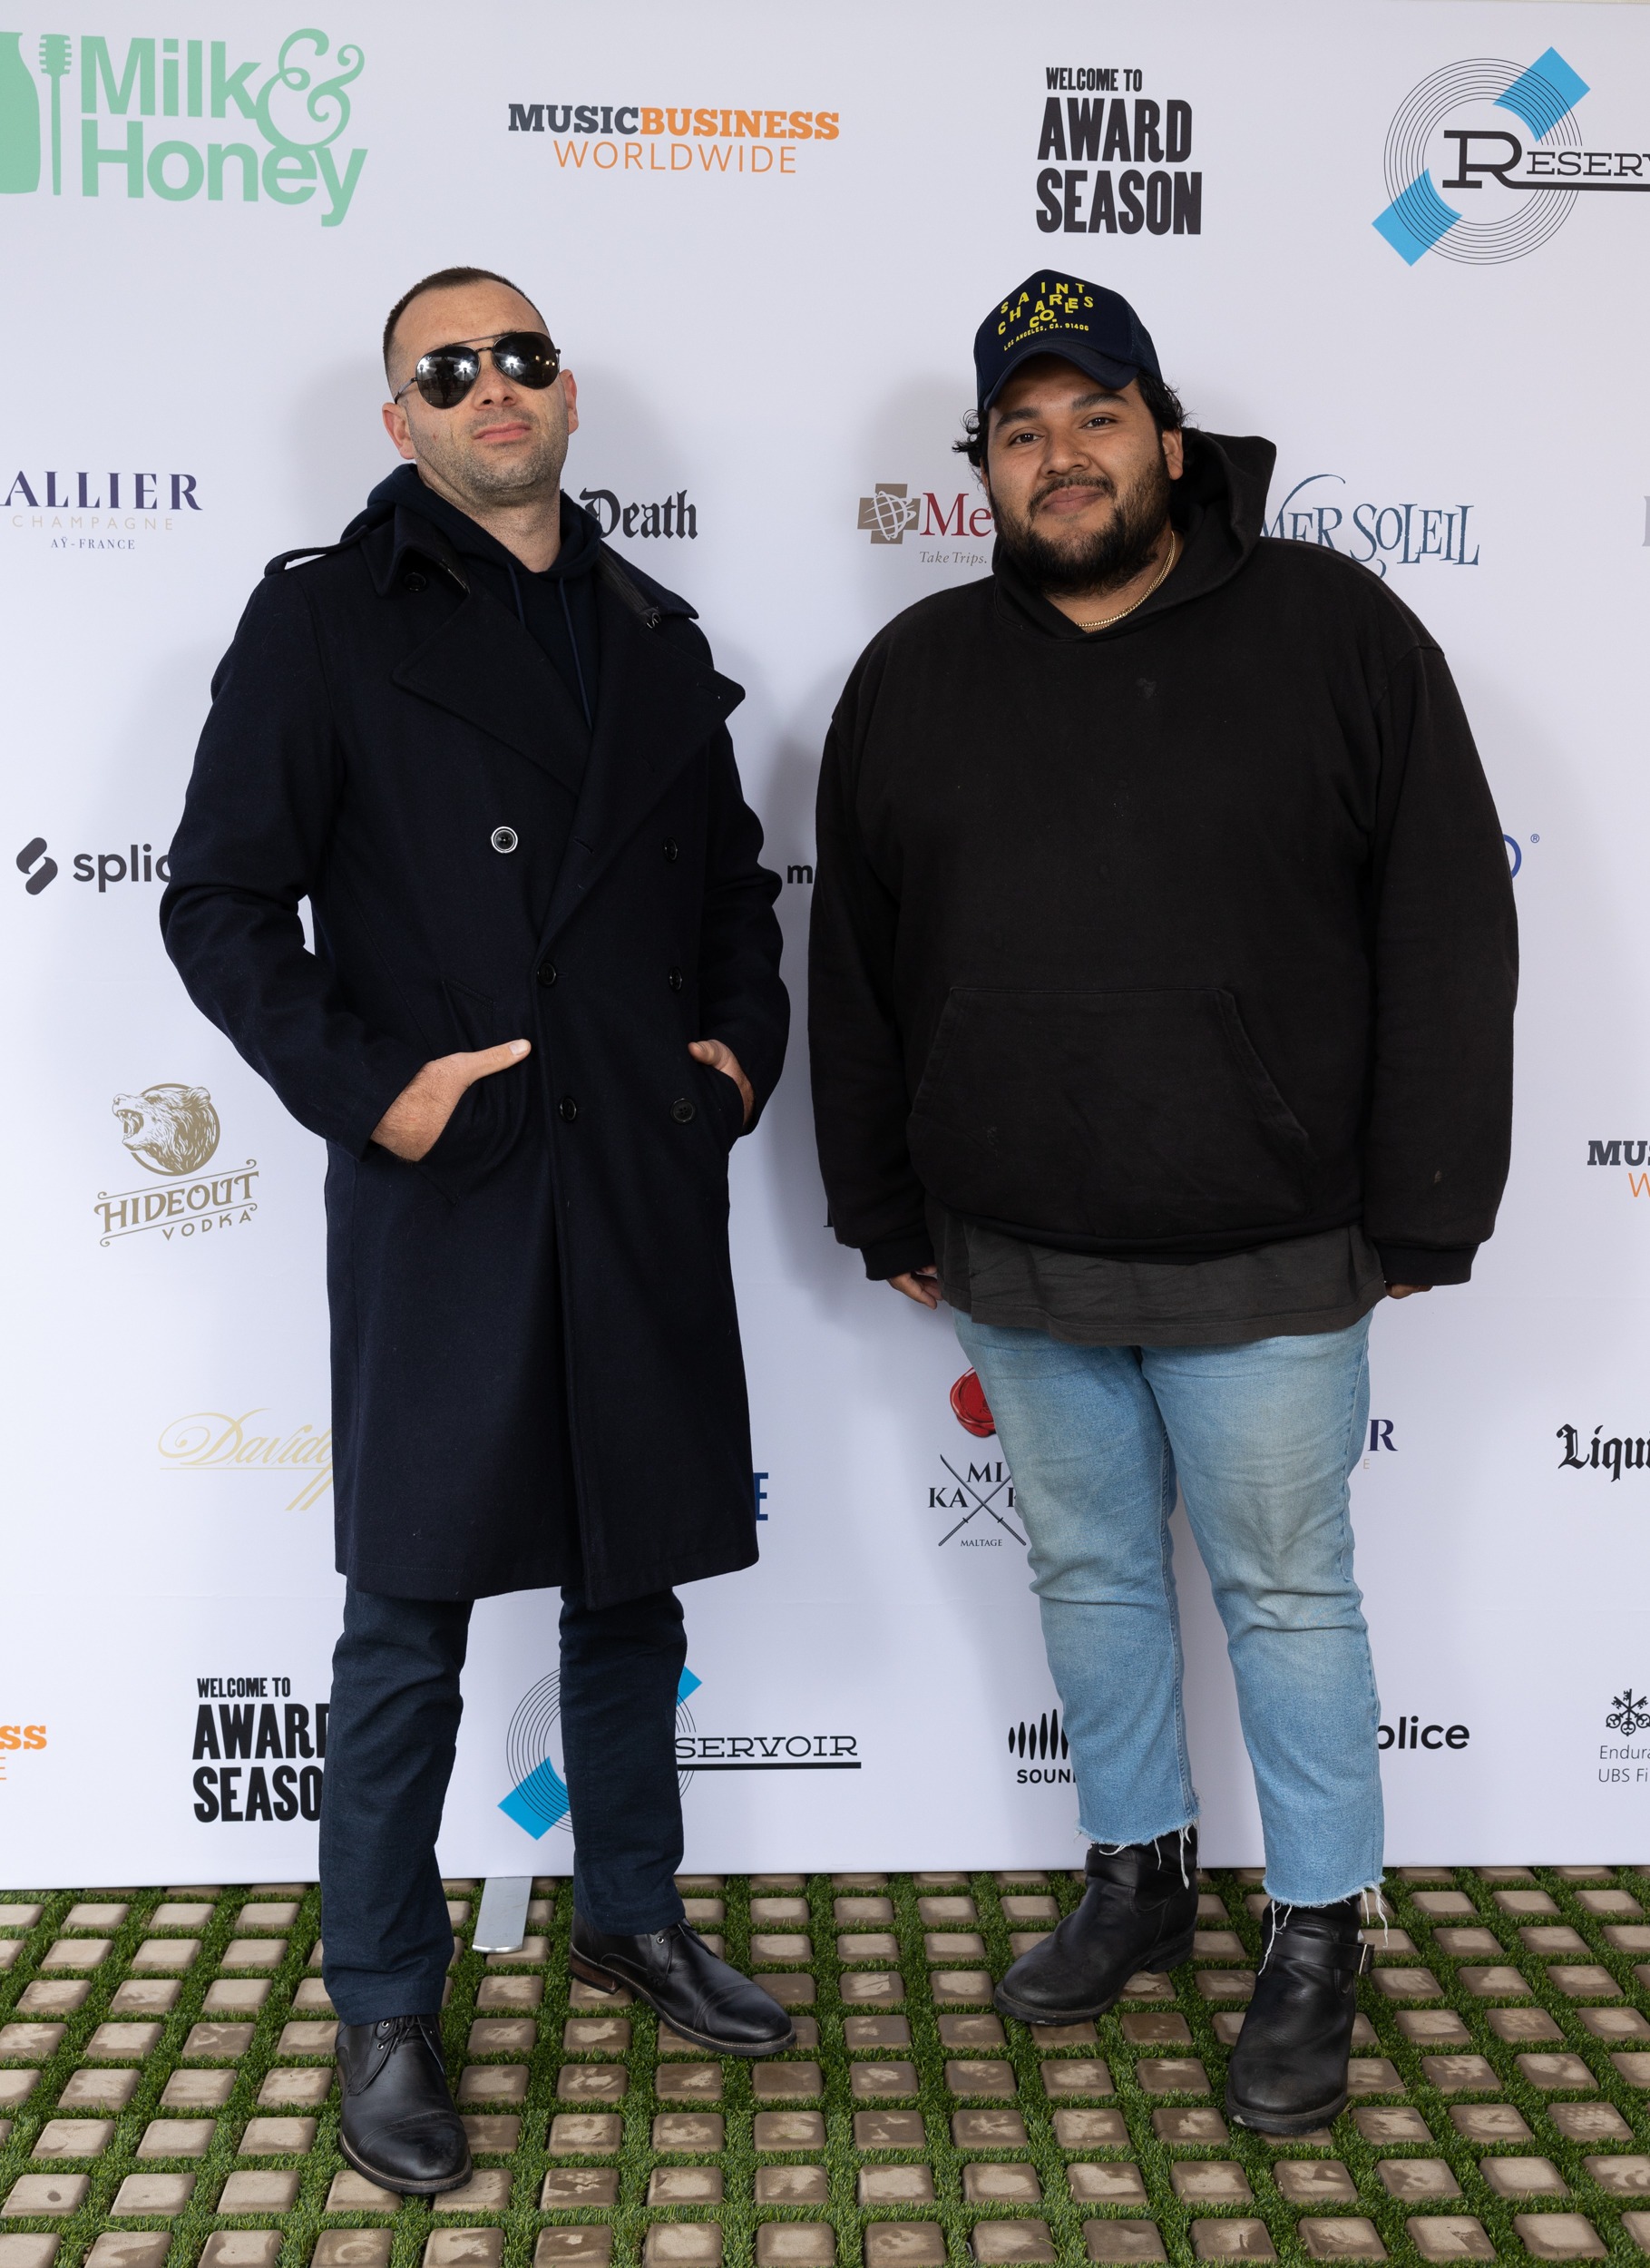 Killer Mike – and a host of top execs – joined 'Award Season' Grammy Week  party, hosted by Milk & Honey and Reservoir - Music Business Worldwide